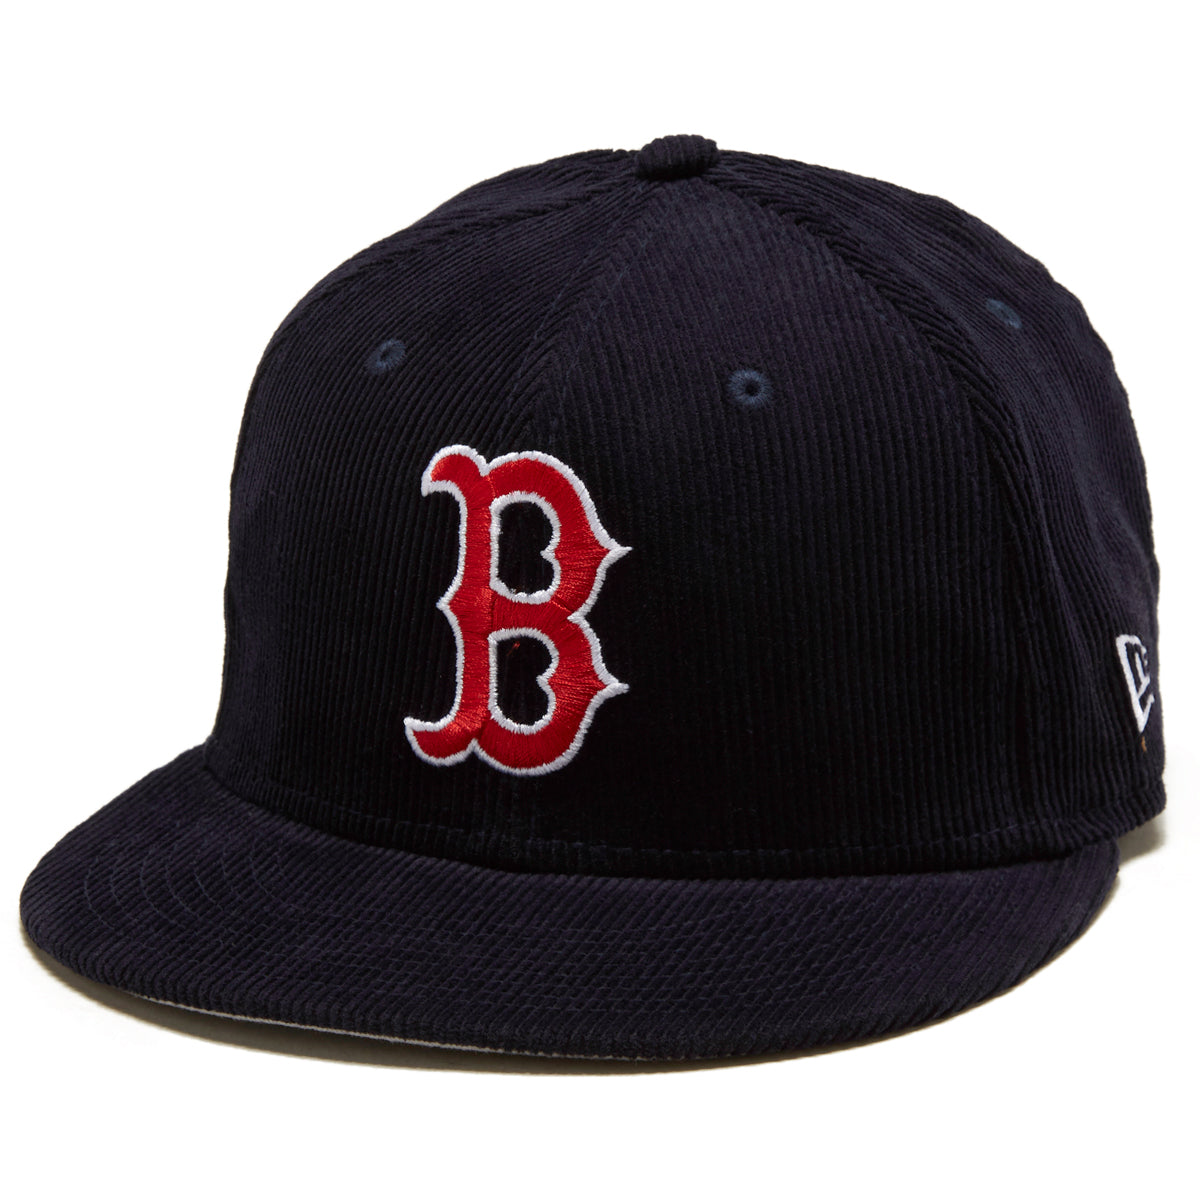 New Era Throwback Cord 17208 Boston Red Sox Hat - Navy/Red image 1